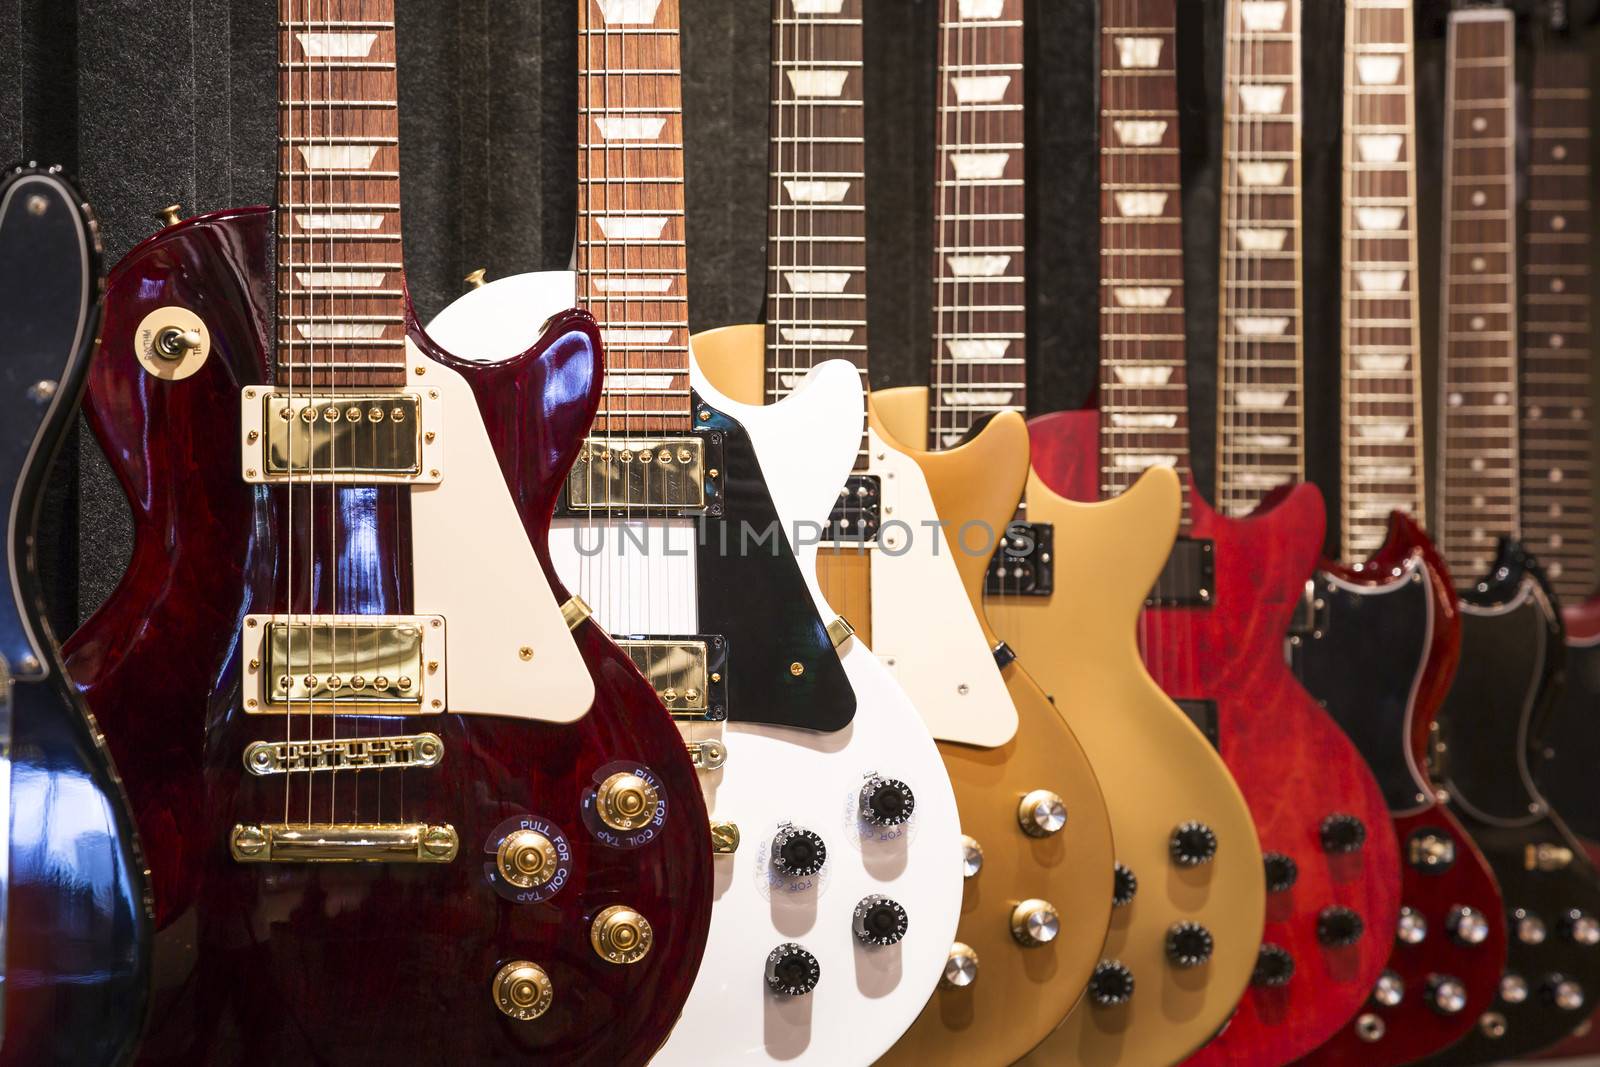 A row of electric Guitar on display